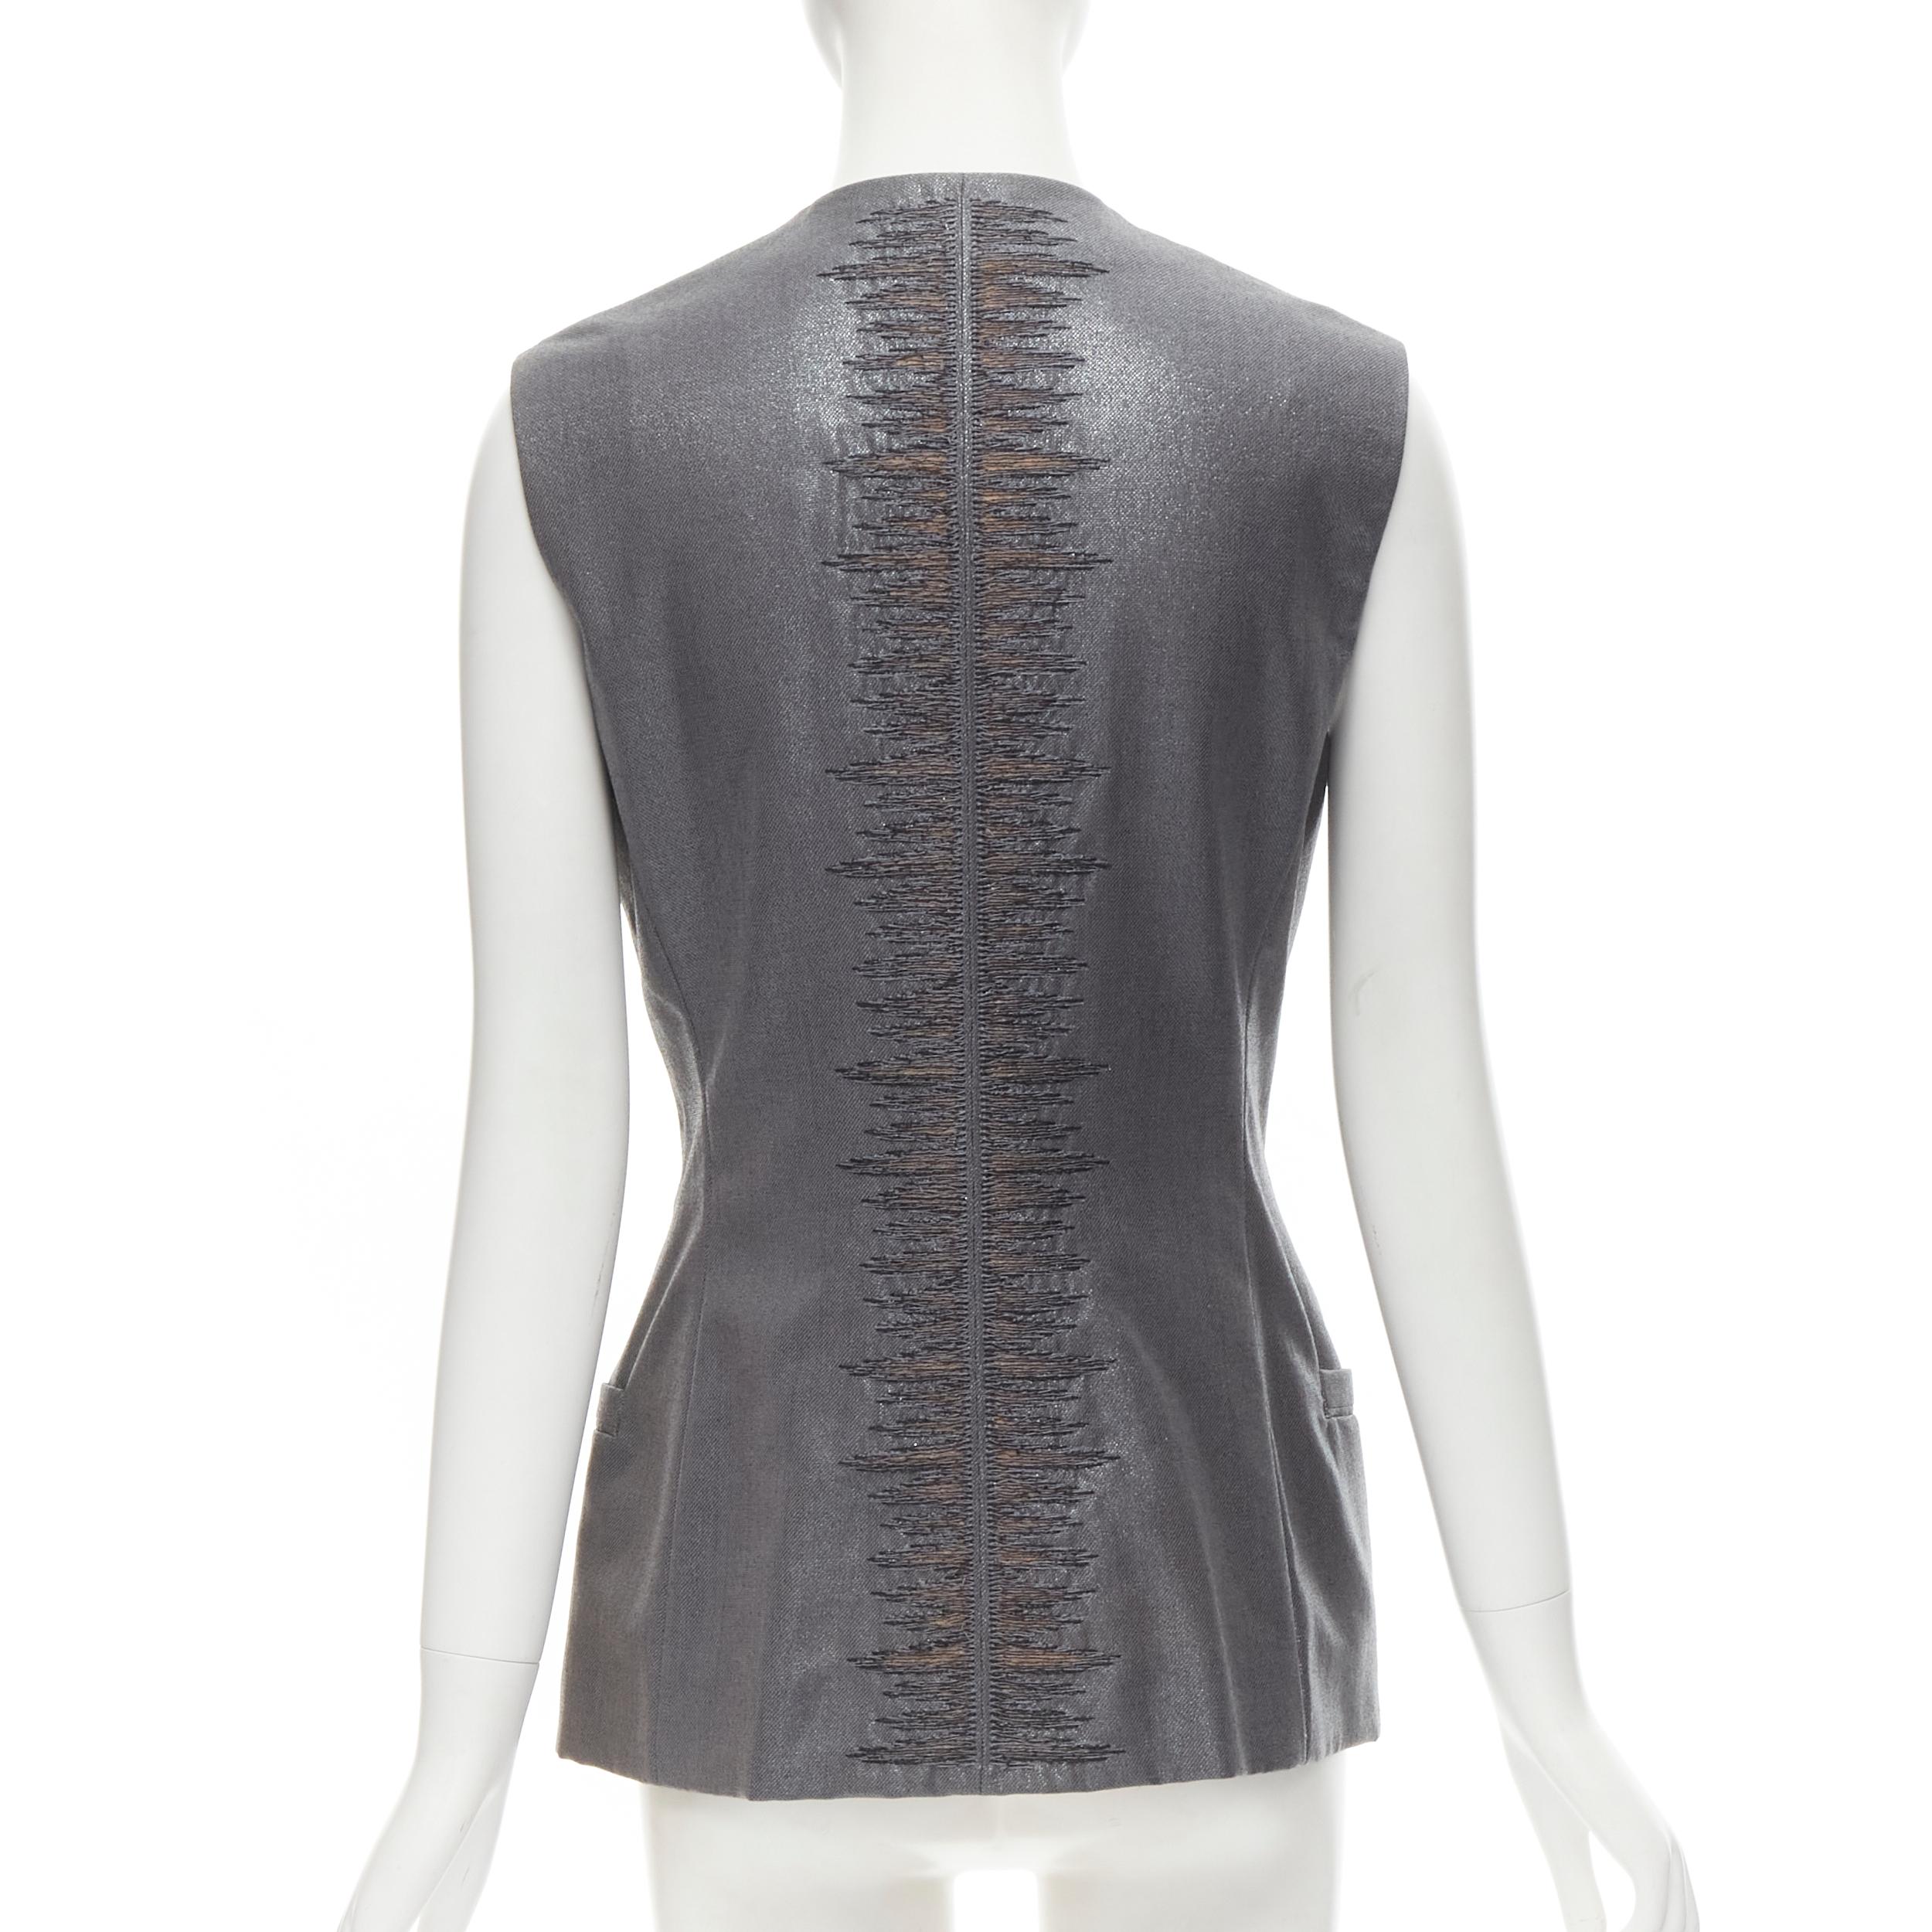 GIANNI VERSACE 1998 Vintage metallic silver lurex embroidered back vest 
Reference: GIYG/A00188 
Brand: Gianni Versace 
Collection: 1998 
Material: Wool 
Color: Silver
Pattern: Solid 
Closure: Zip 
Extra Detail: Concealed zip snap button. Metallic